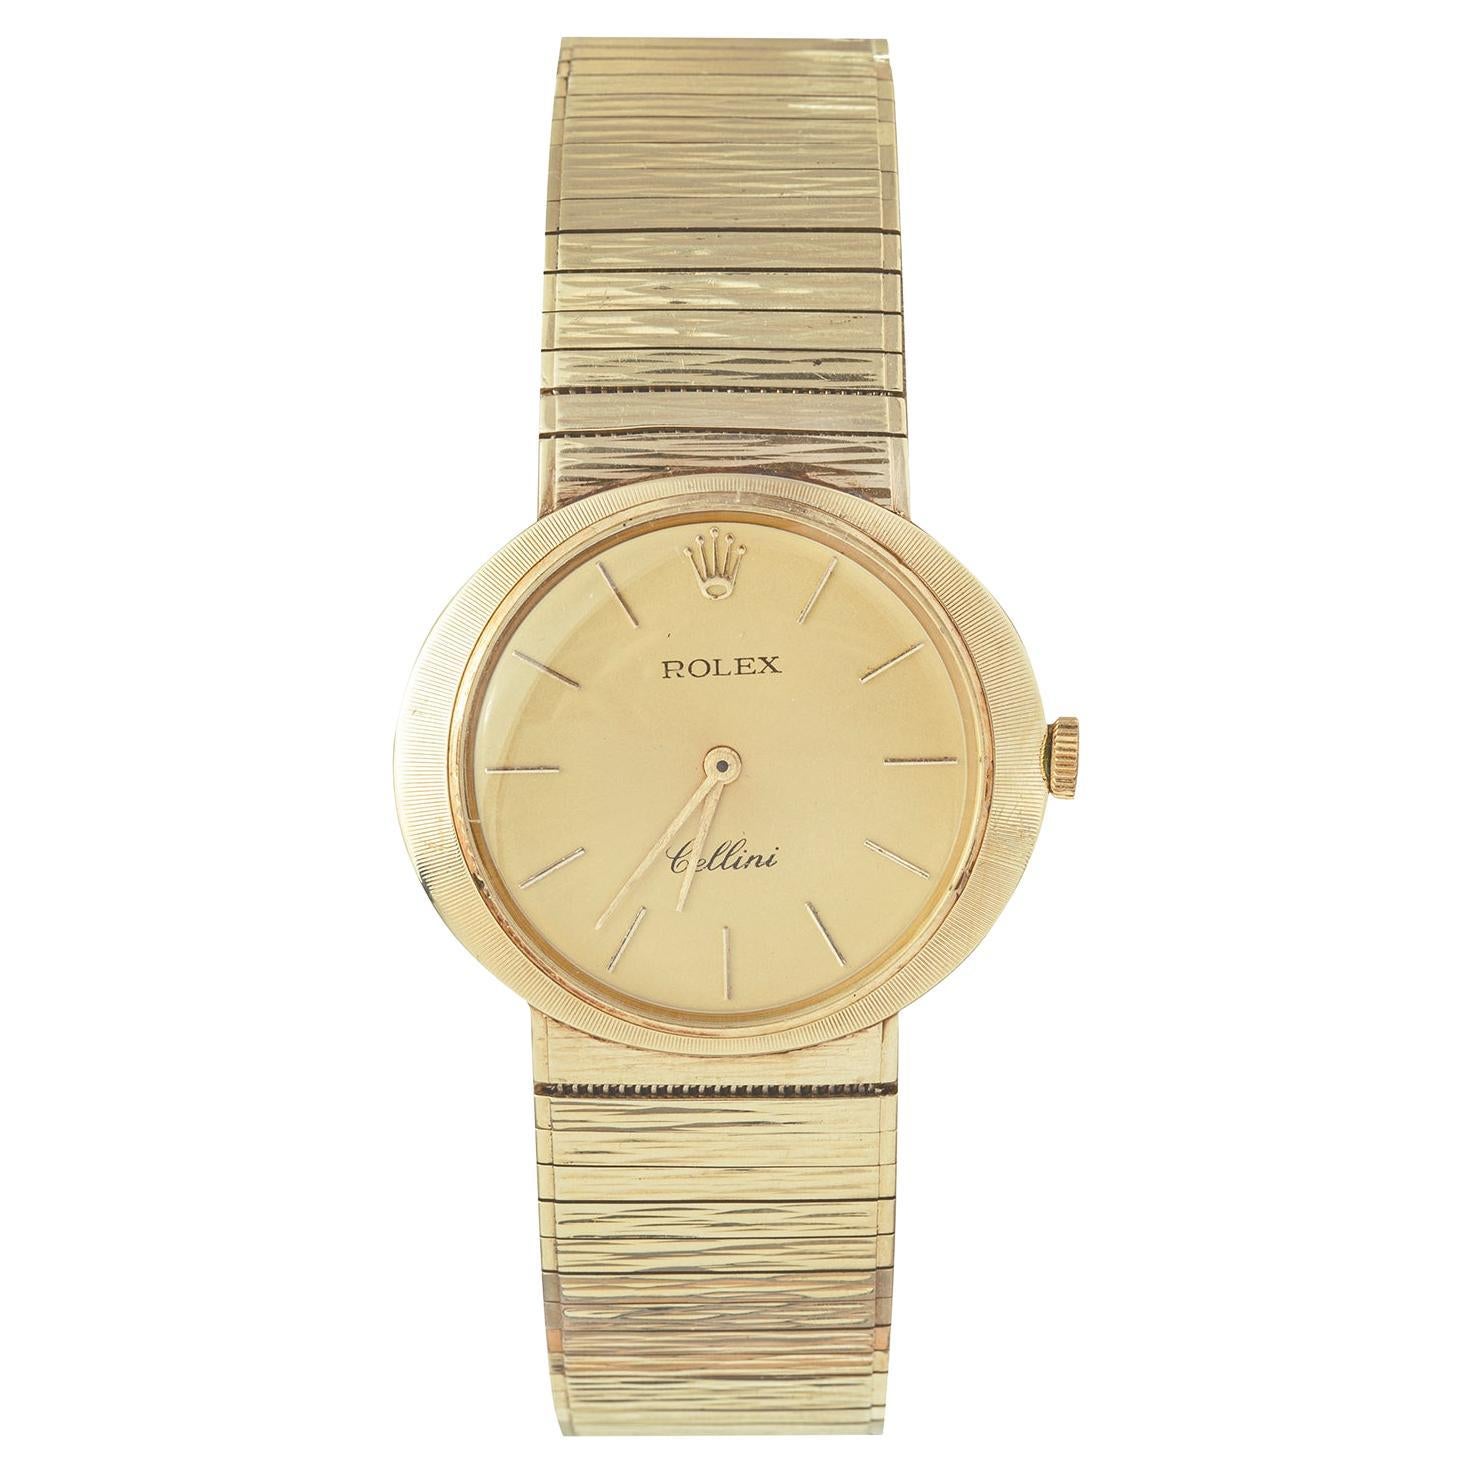 Rolex Cellini Hand-Wound Yellow Gold, Ref. 606 For Sale